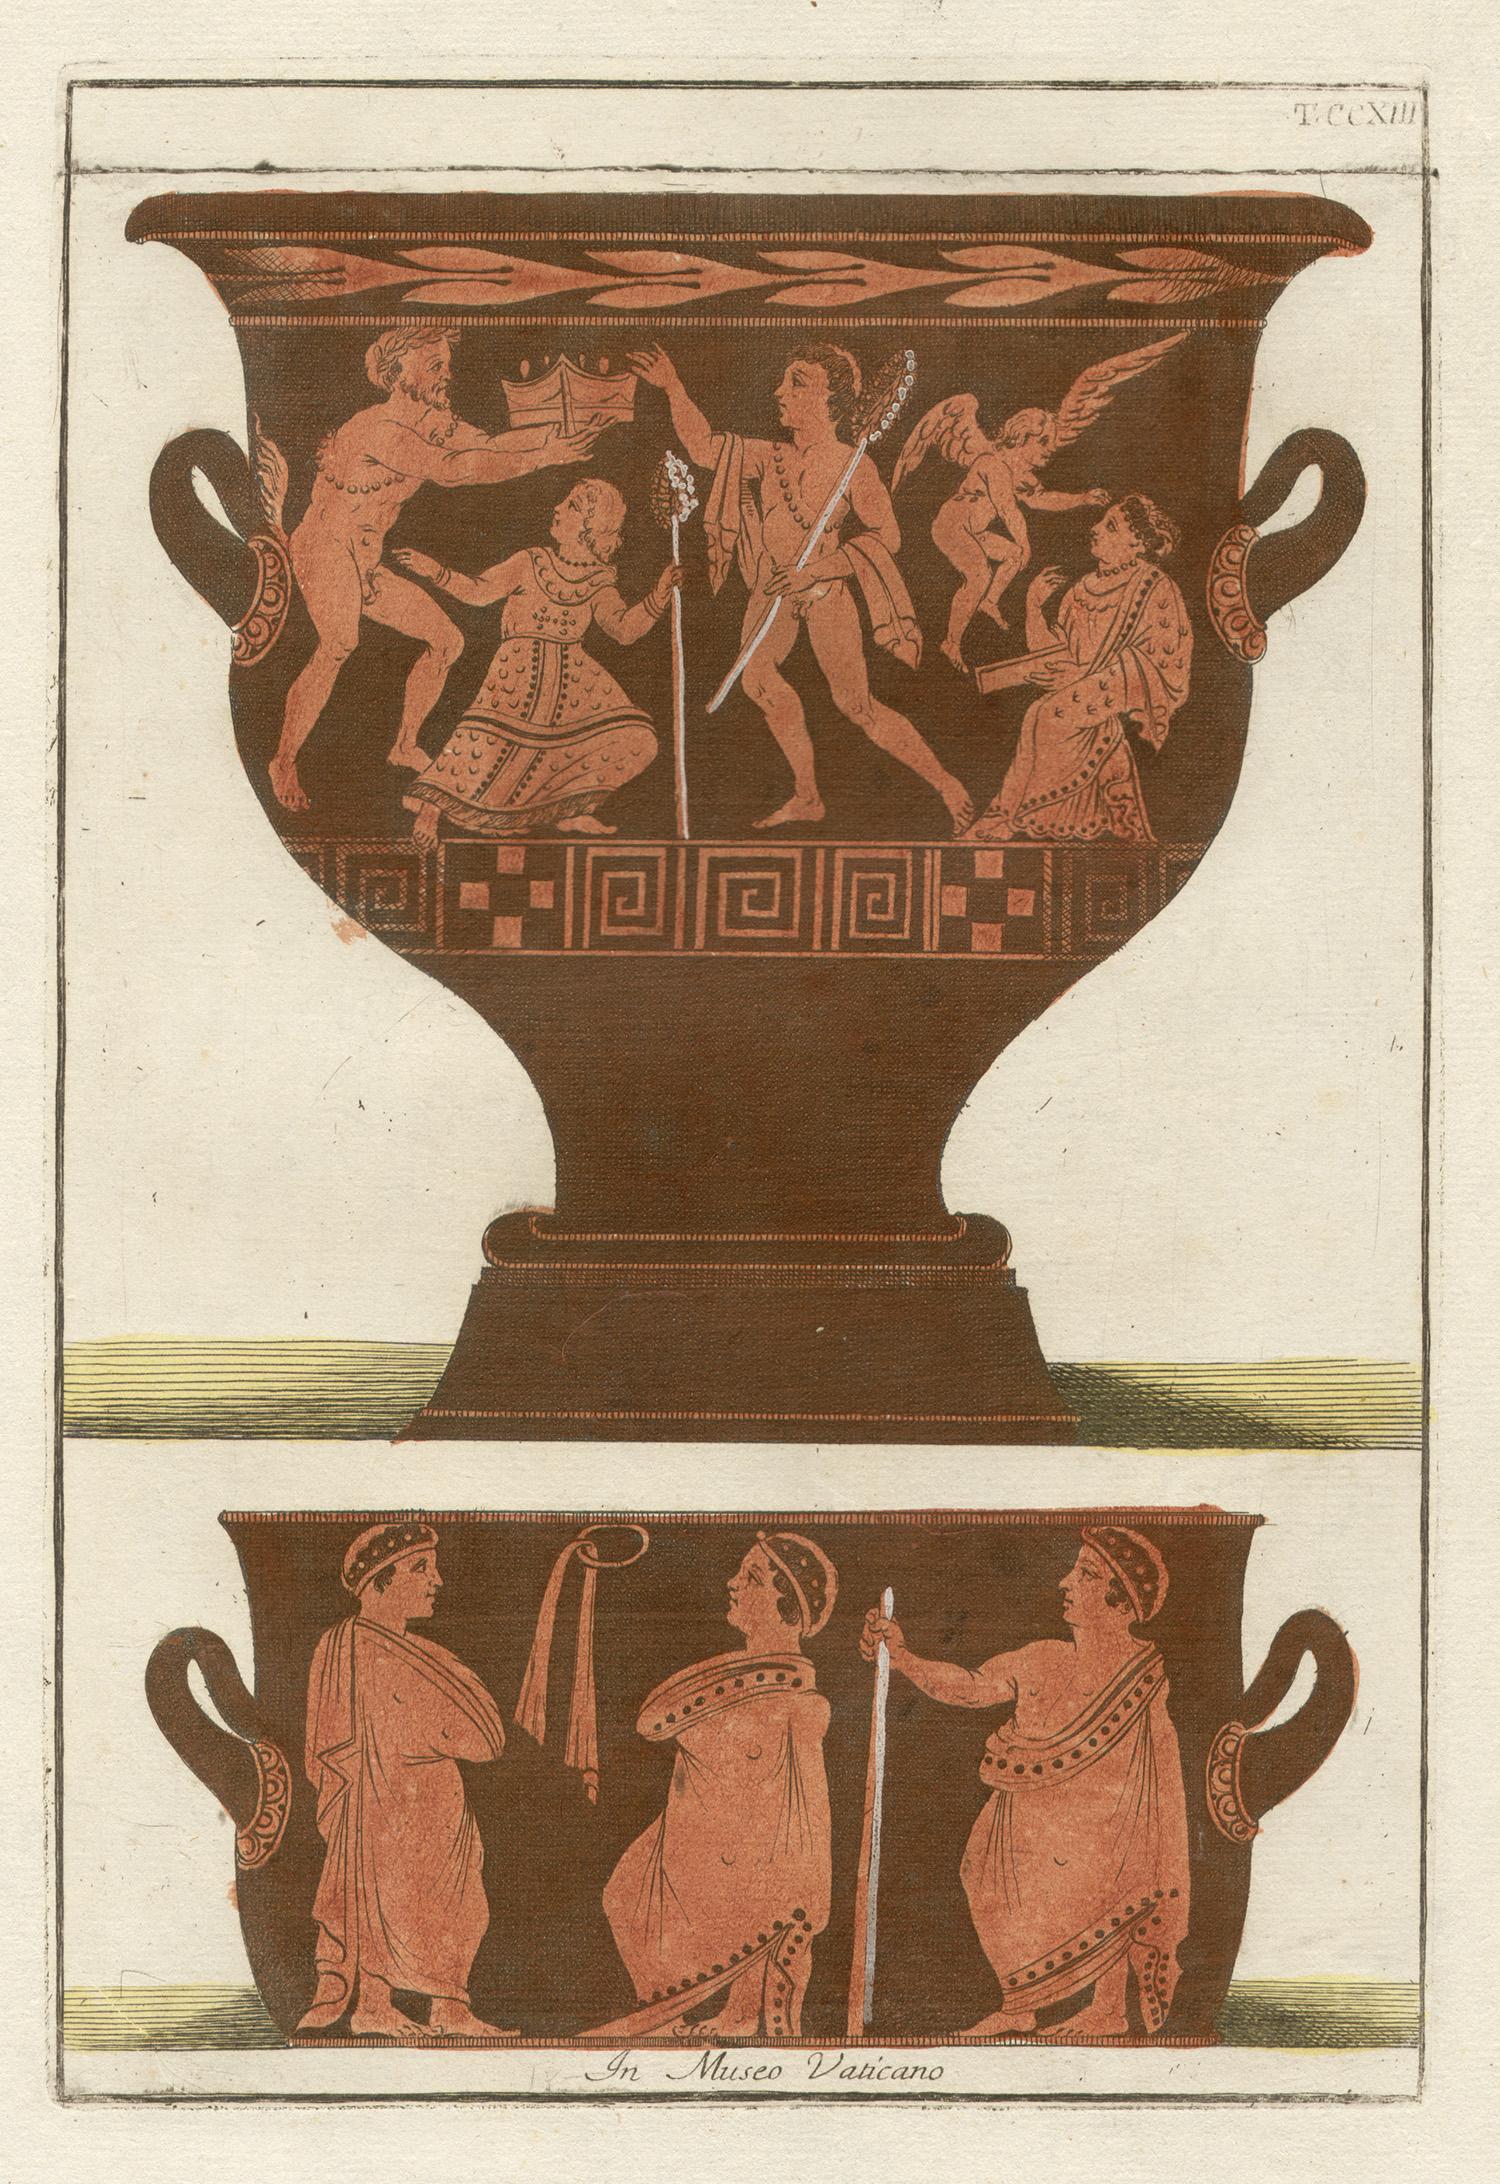 Unknown Figurative Print - Classical Greek Vase-Painting Engraving by Passeri